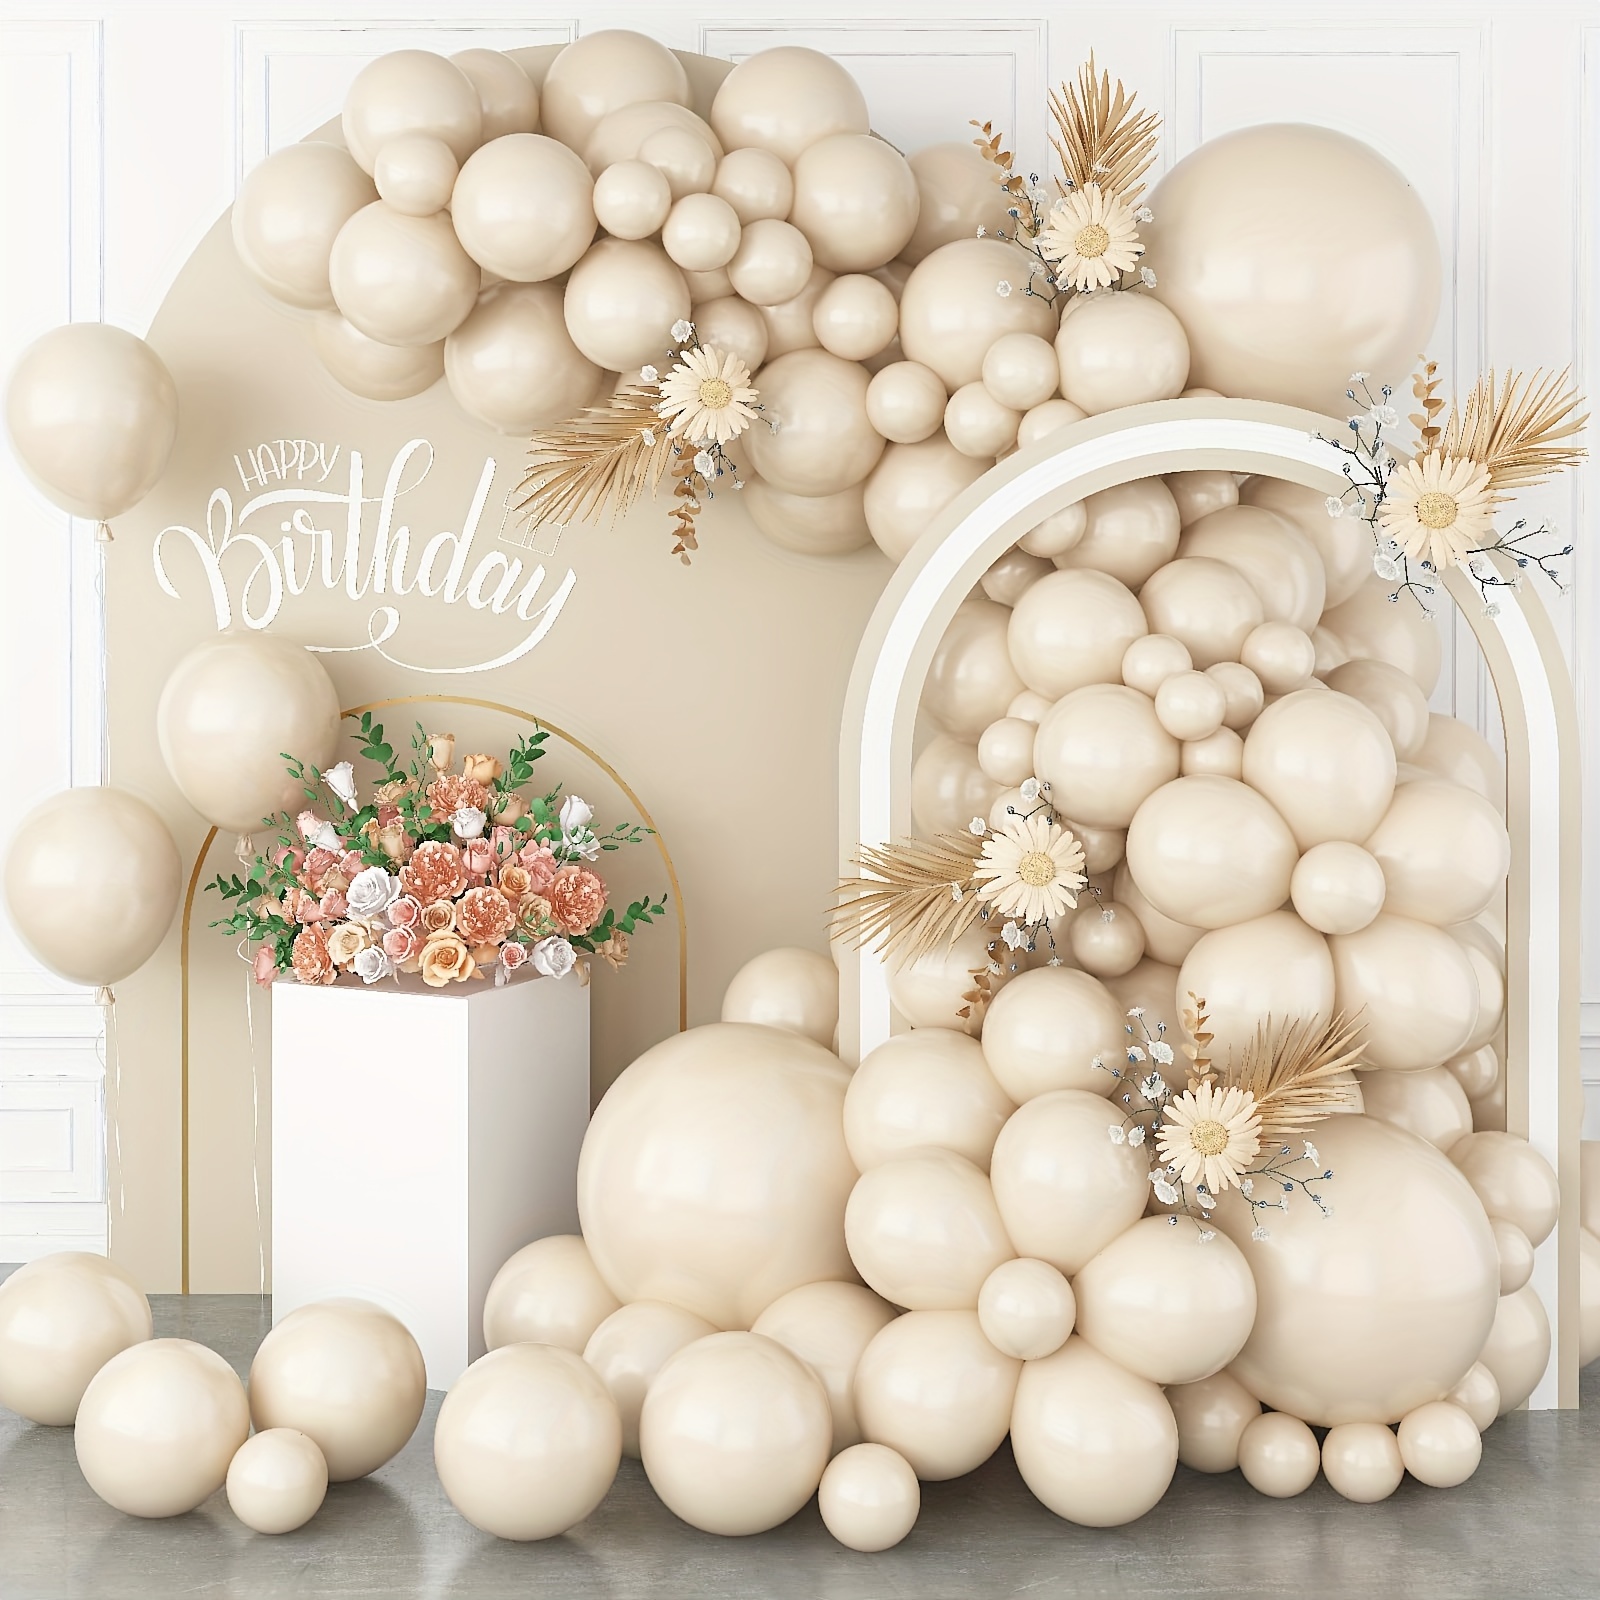 

103pcs Sand White Balloon Set - Round Shape For Birthday Party, Engagement, Wedding Decor - Versatile For All Seasons, Ages 8+ - Emulsion Material With No Electricity Needed